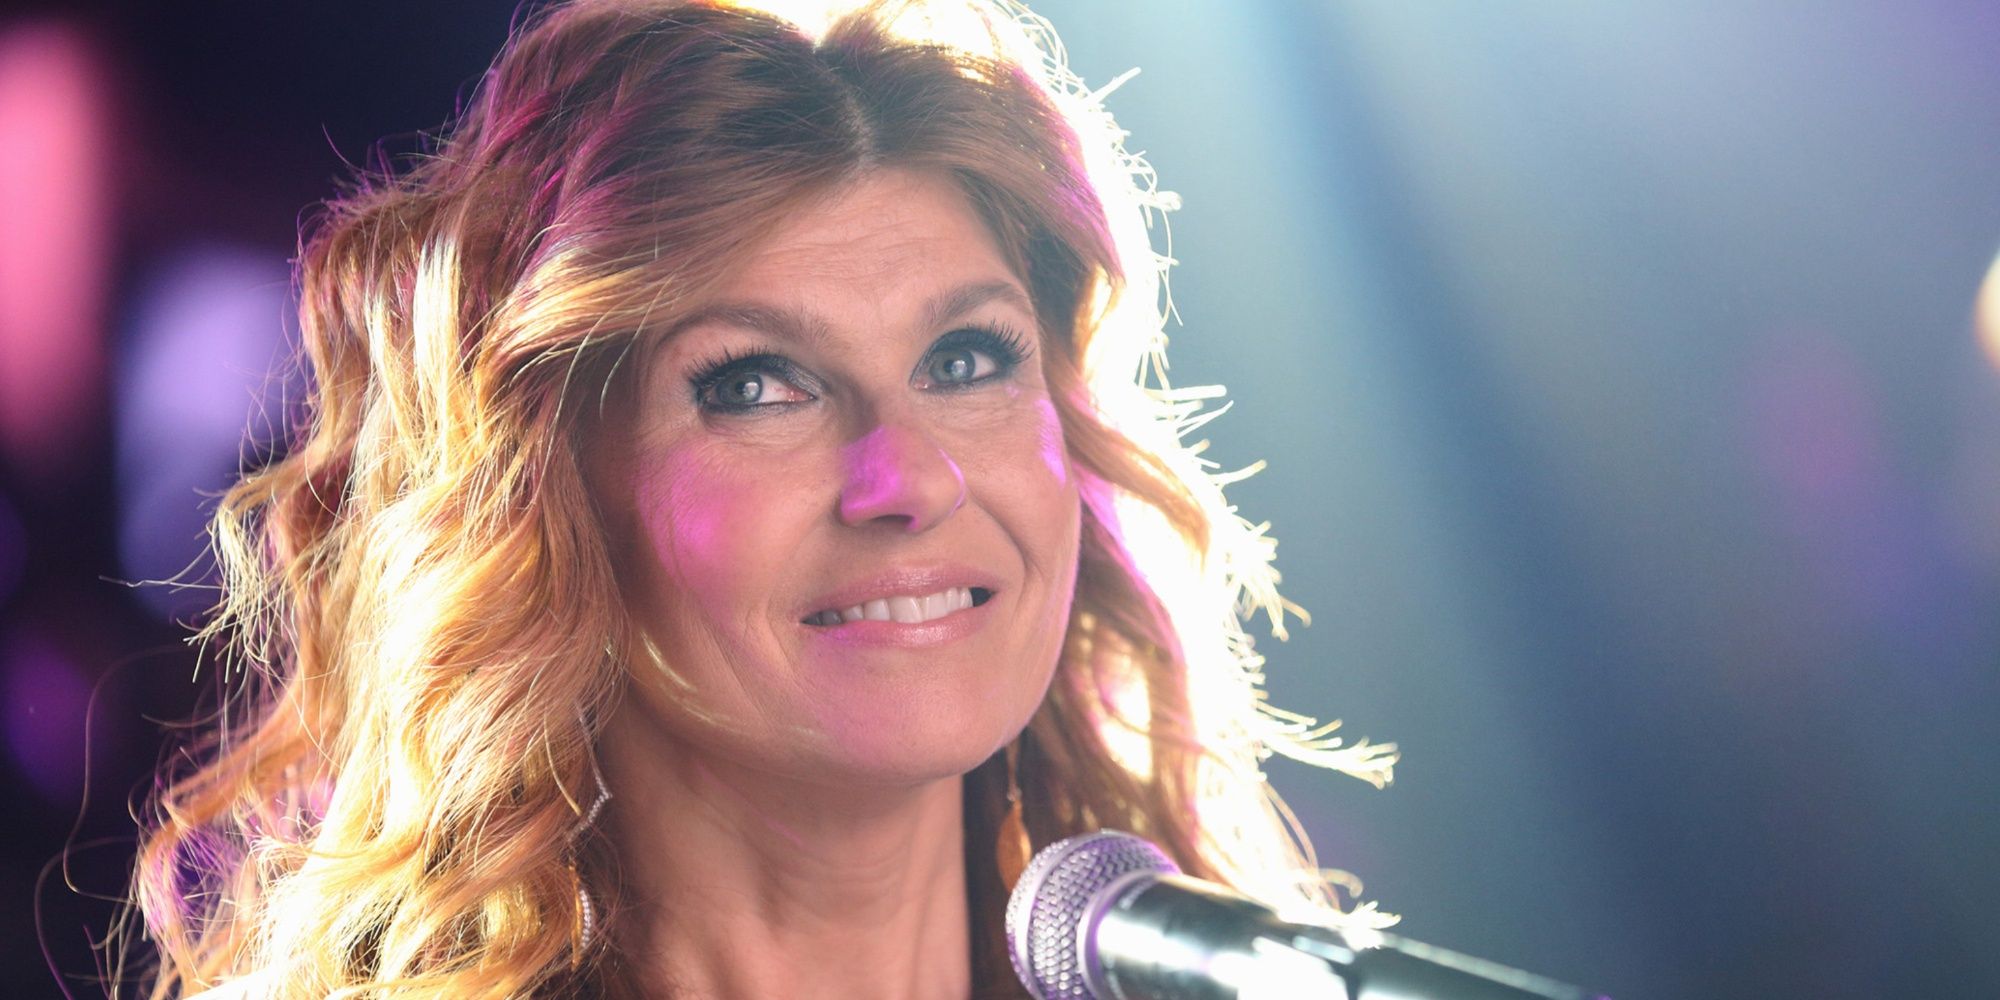 Rayna James on stage smiling in Nashville